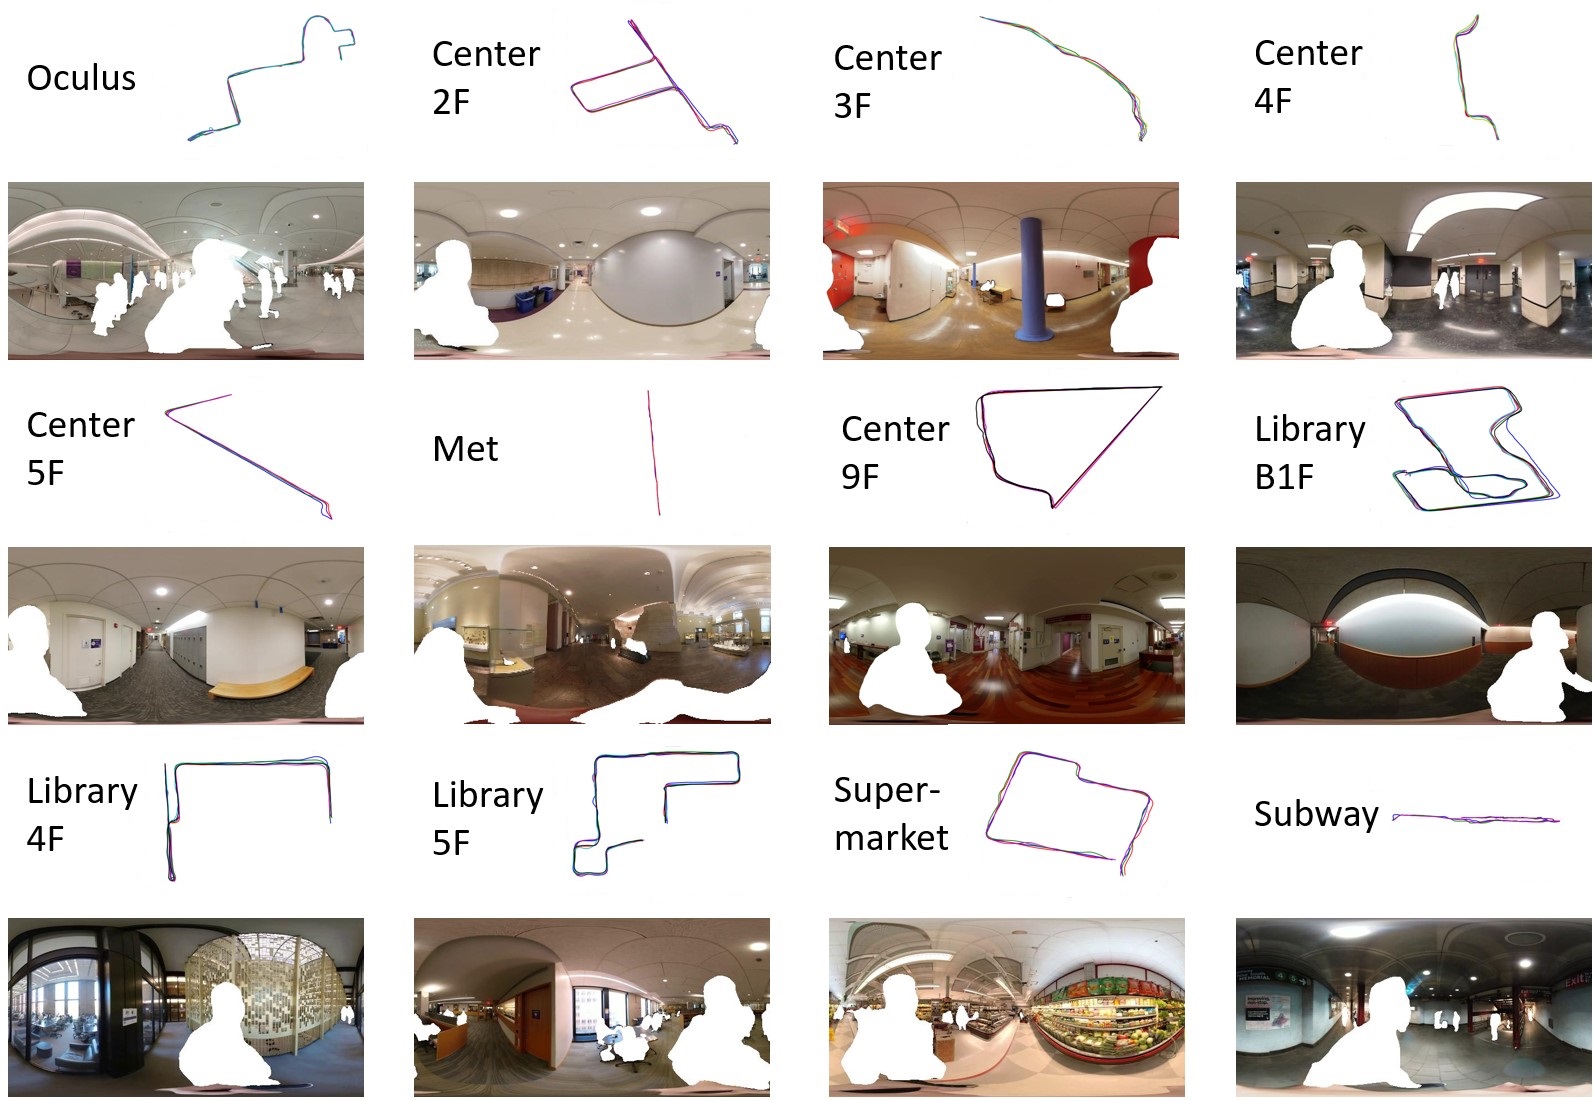 NYC-Indoor-VPR: A Long-Term Indoor Visual Place Recognition Dataset with Semi-Automatic Annotation